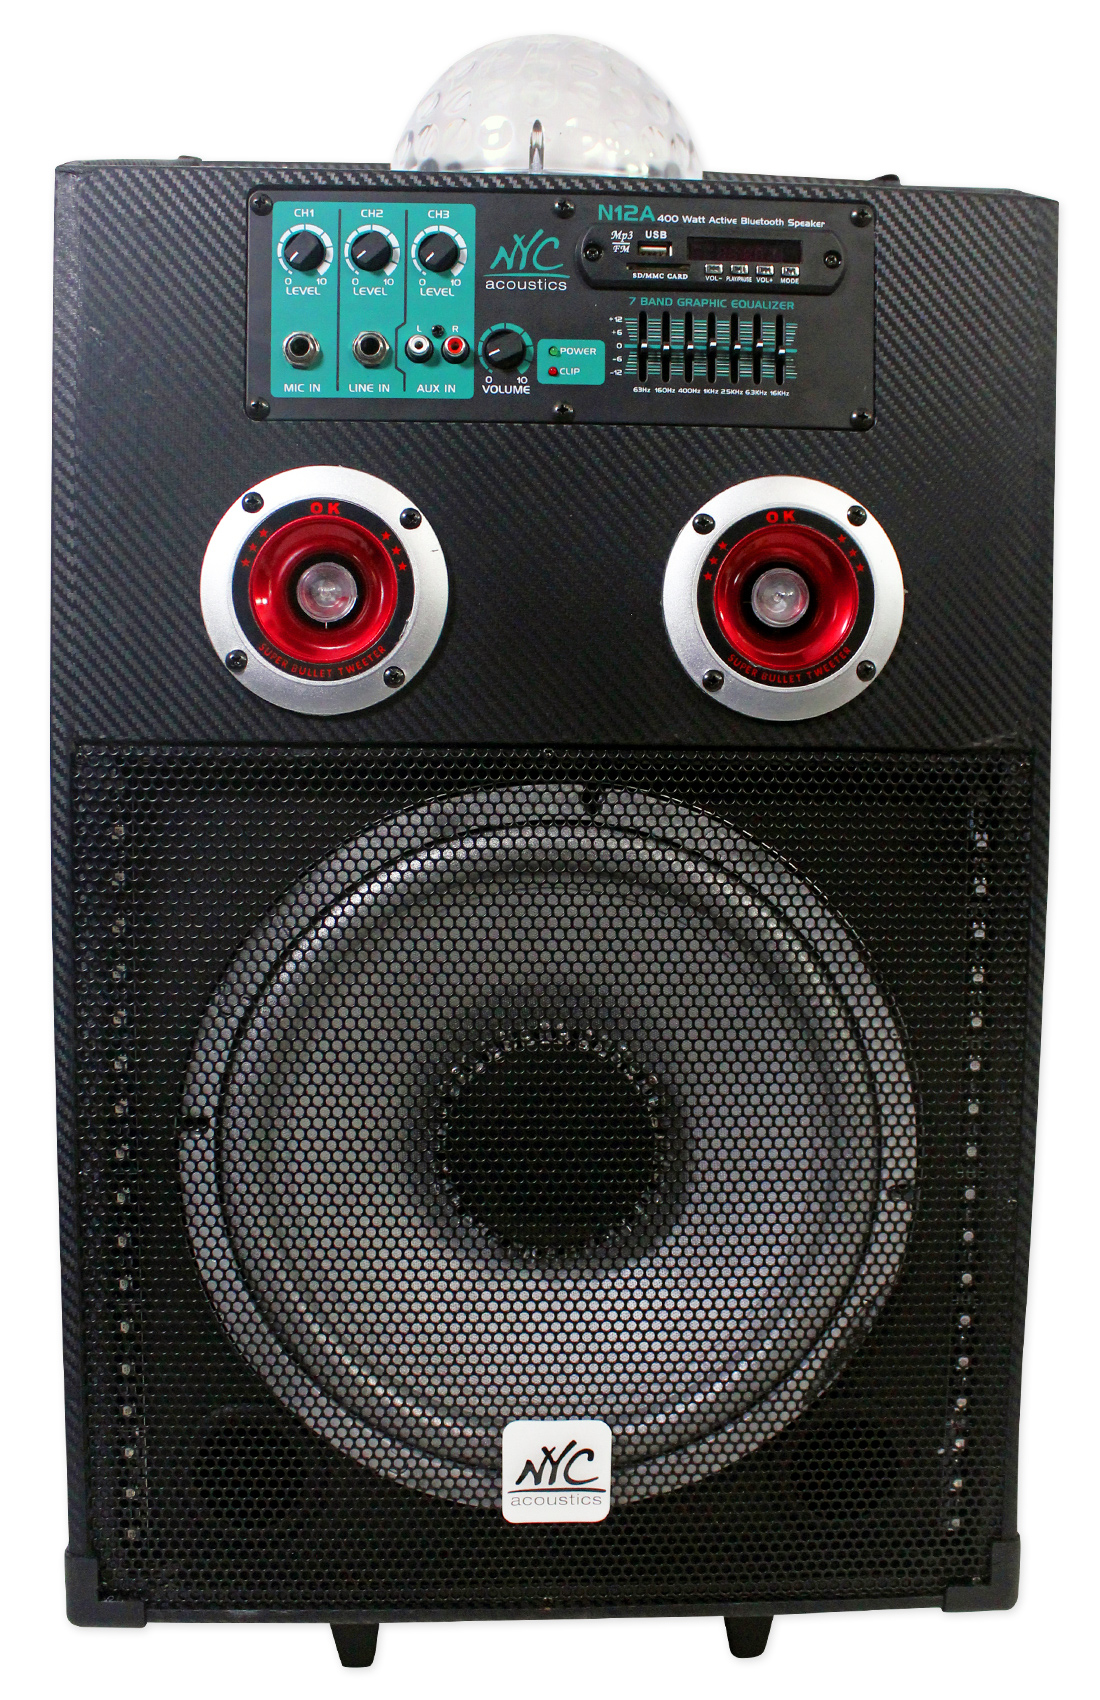 NYC Acoustics N12A 12" 400w Powered Speaker Bluetooth, Party Lights+Microphone - image 2 of 9